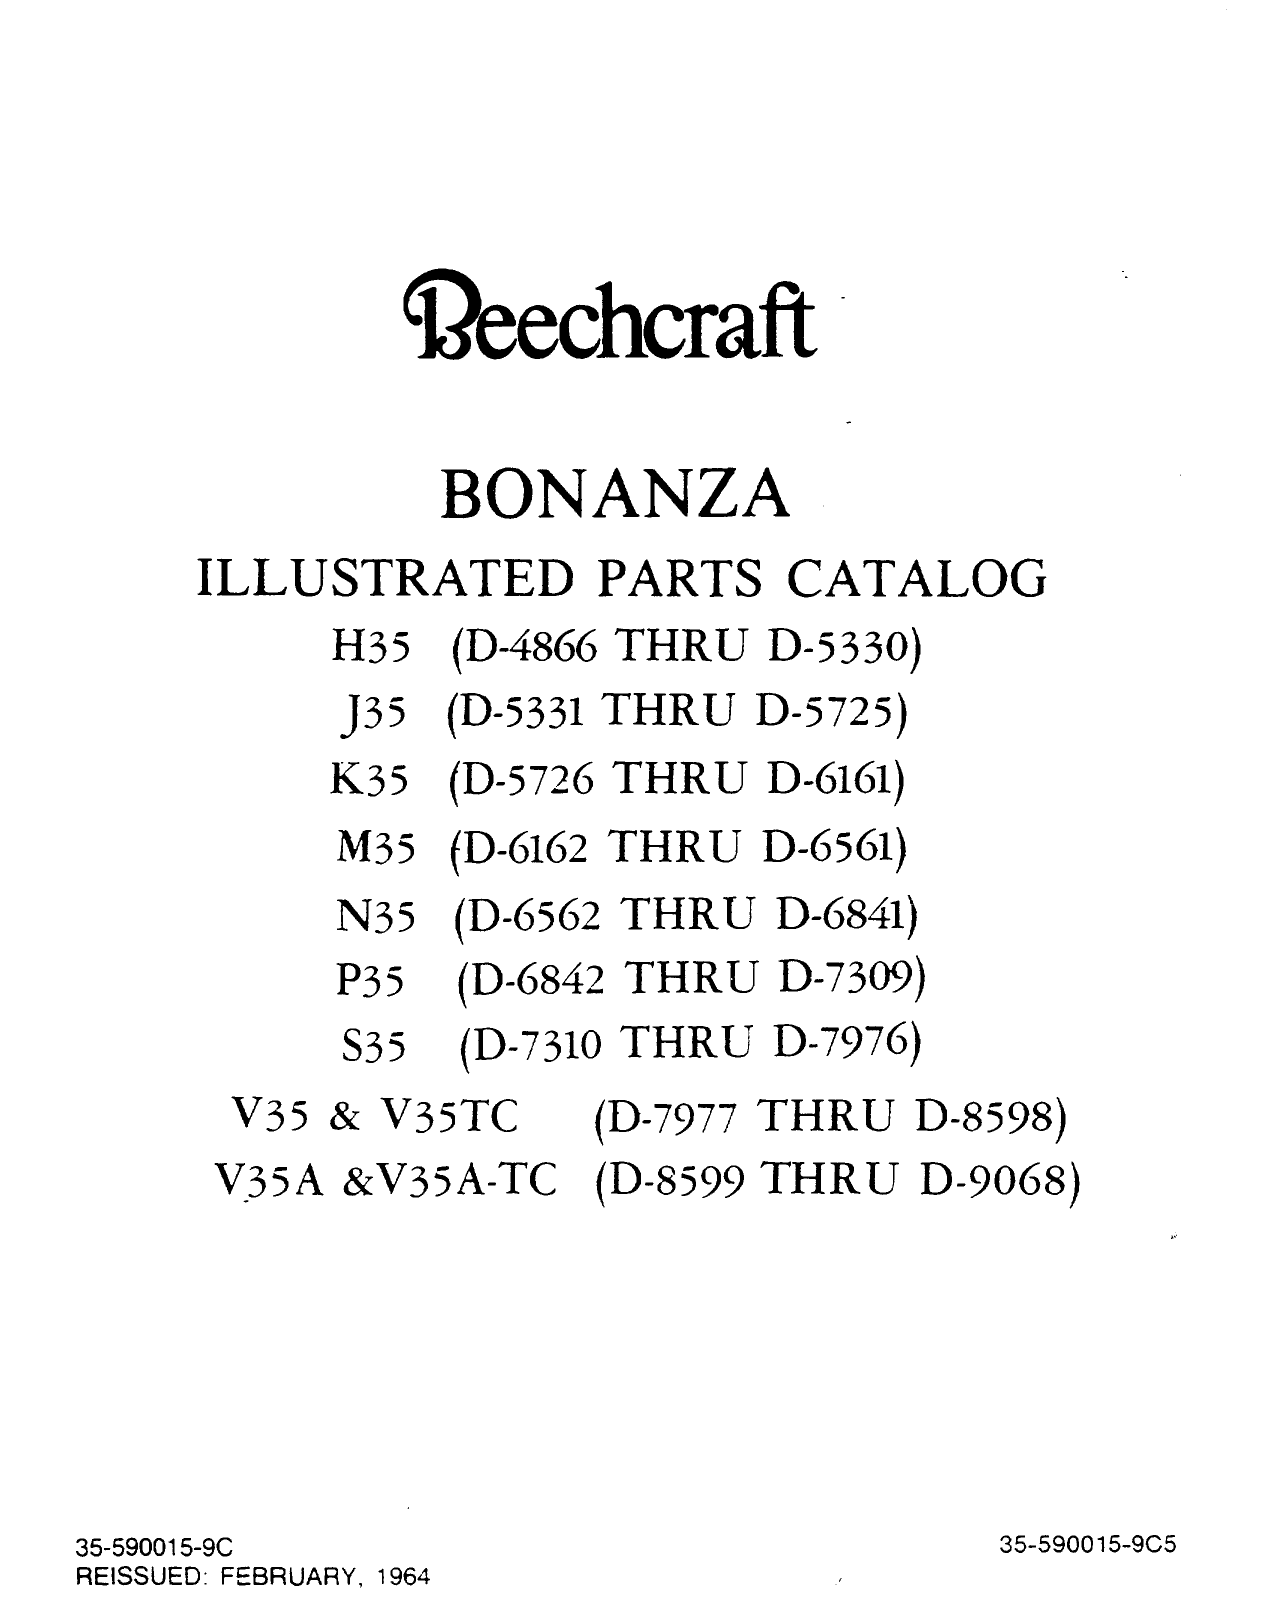 Beechcraft Bonanza H35, J35, K35, M35, N35, P35, S35, V35 & V35TC,  V35A & V35A-TC IPC illustrated parts catalog Preview image 6